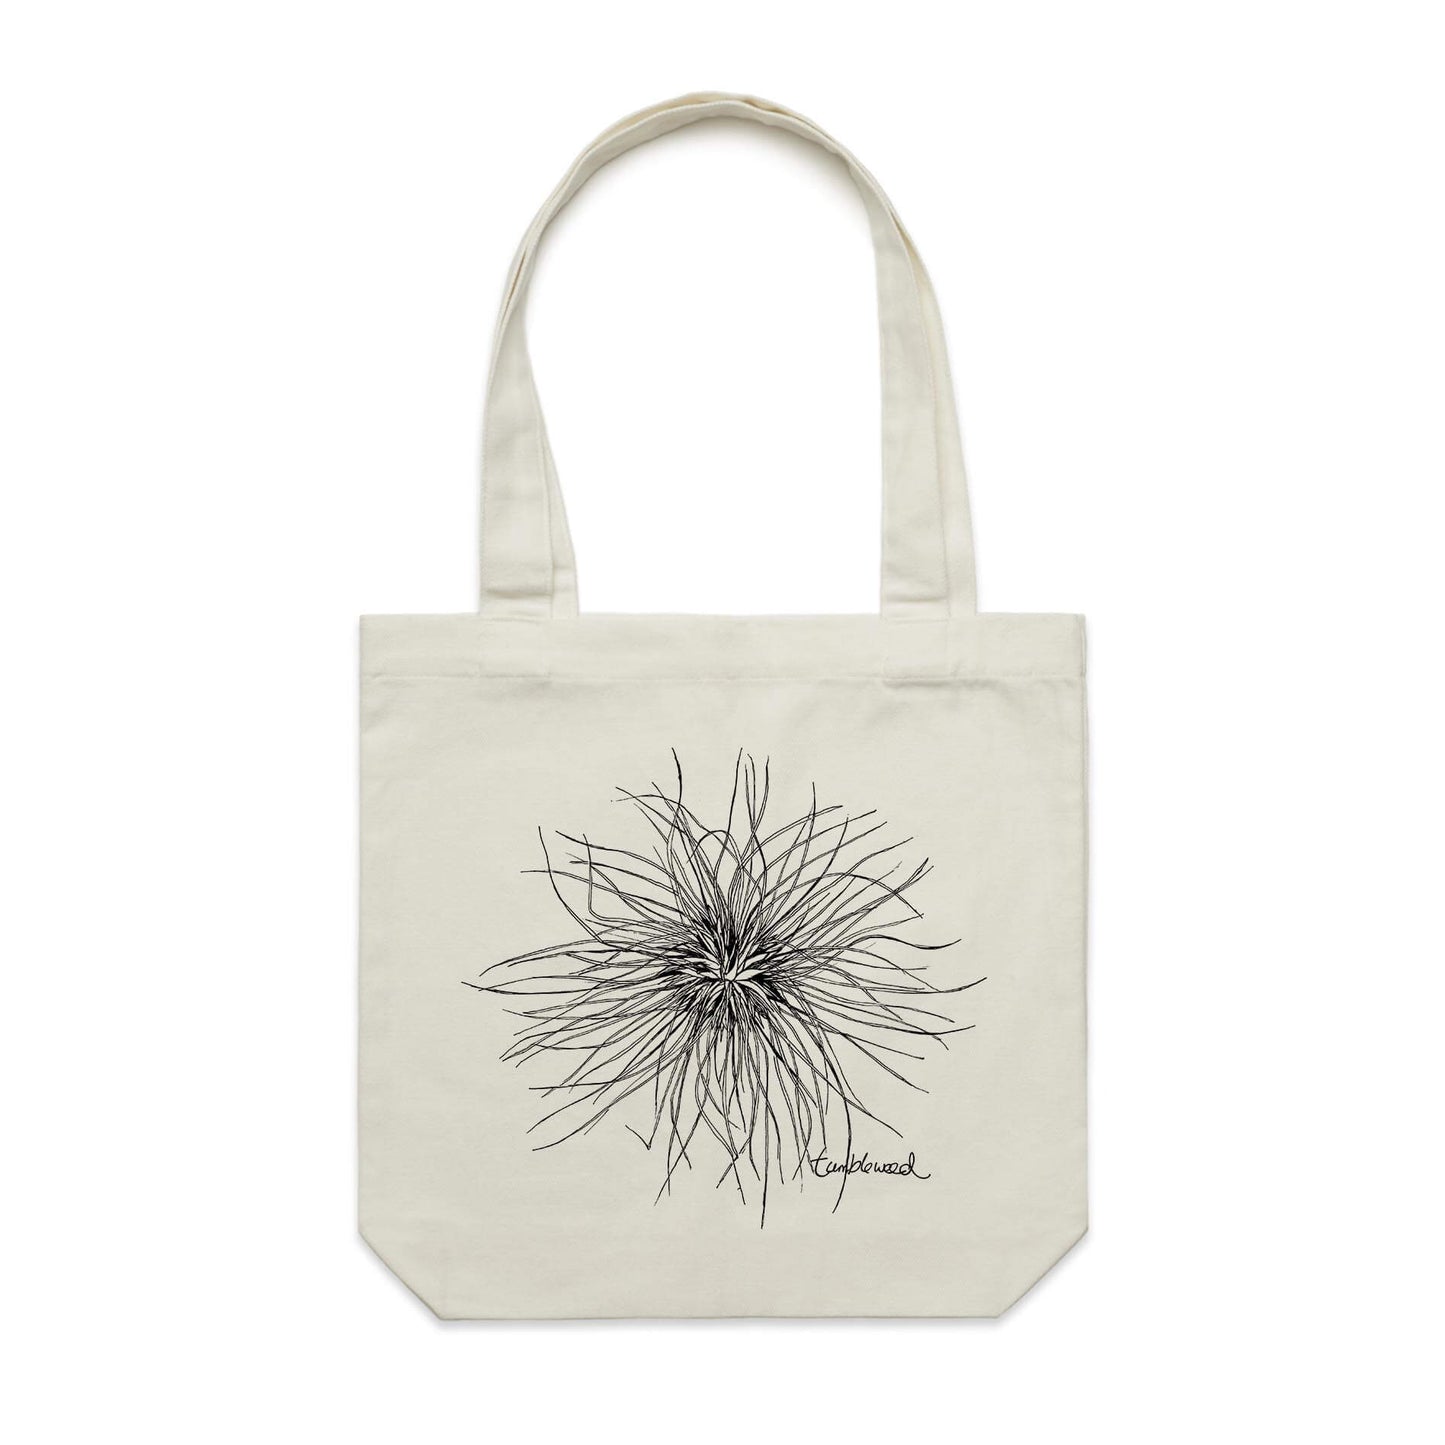 Cotton canvas tote bag with a screen printed Tumbleweed design.